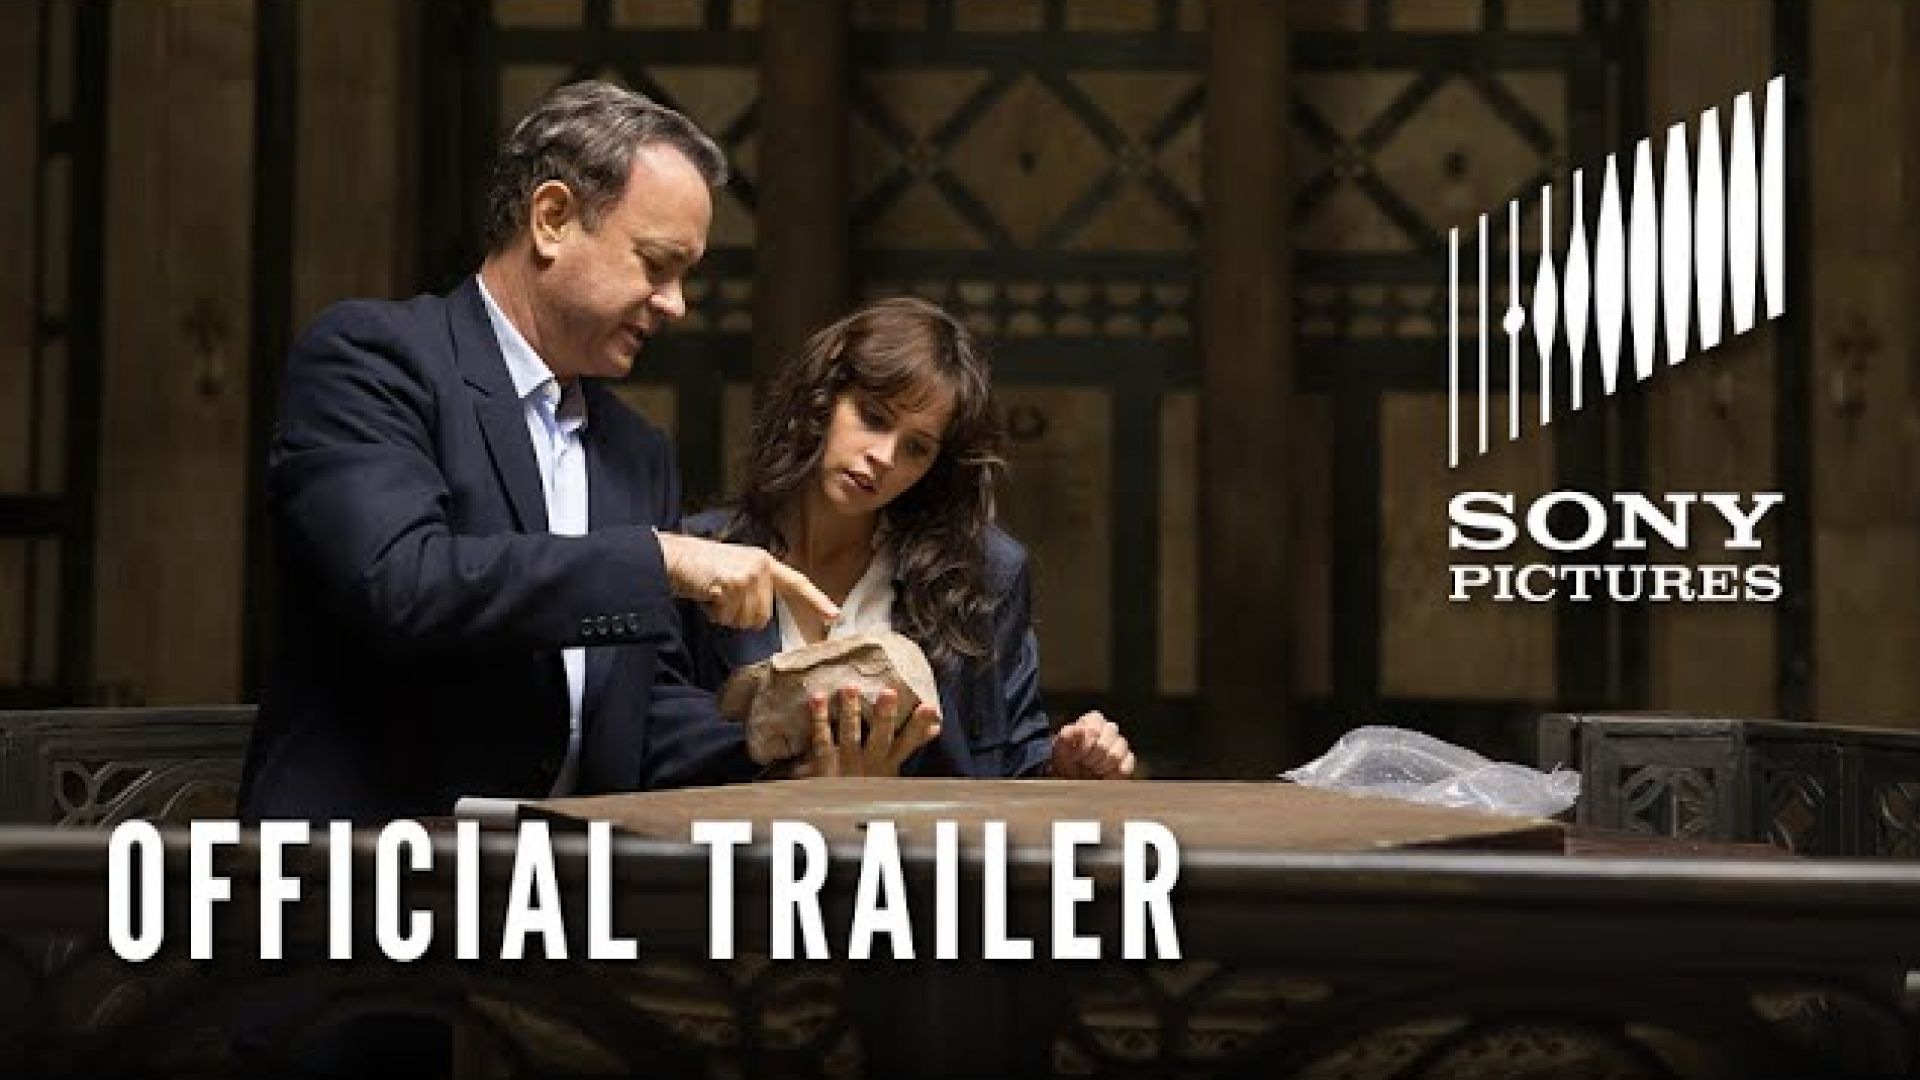 Tom Hanks and Felicity Jones in a race to unlock a mystery i